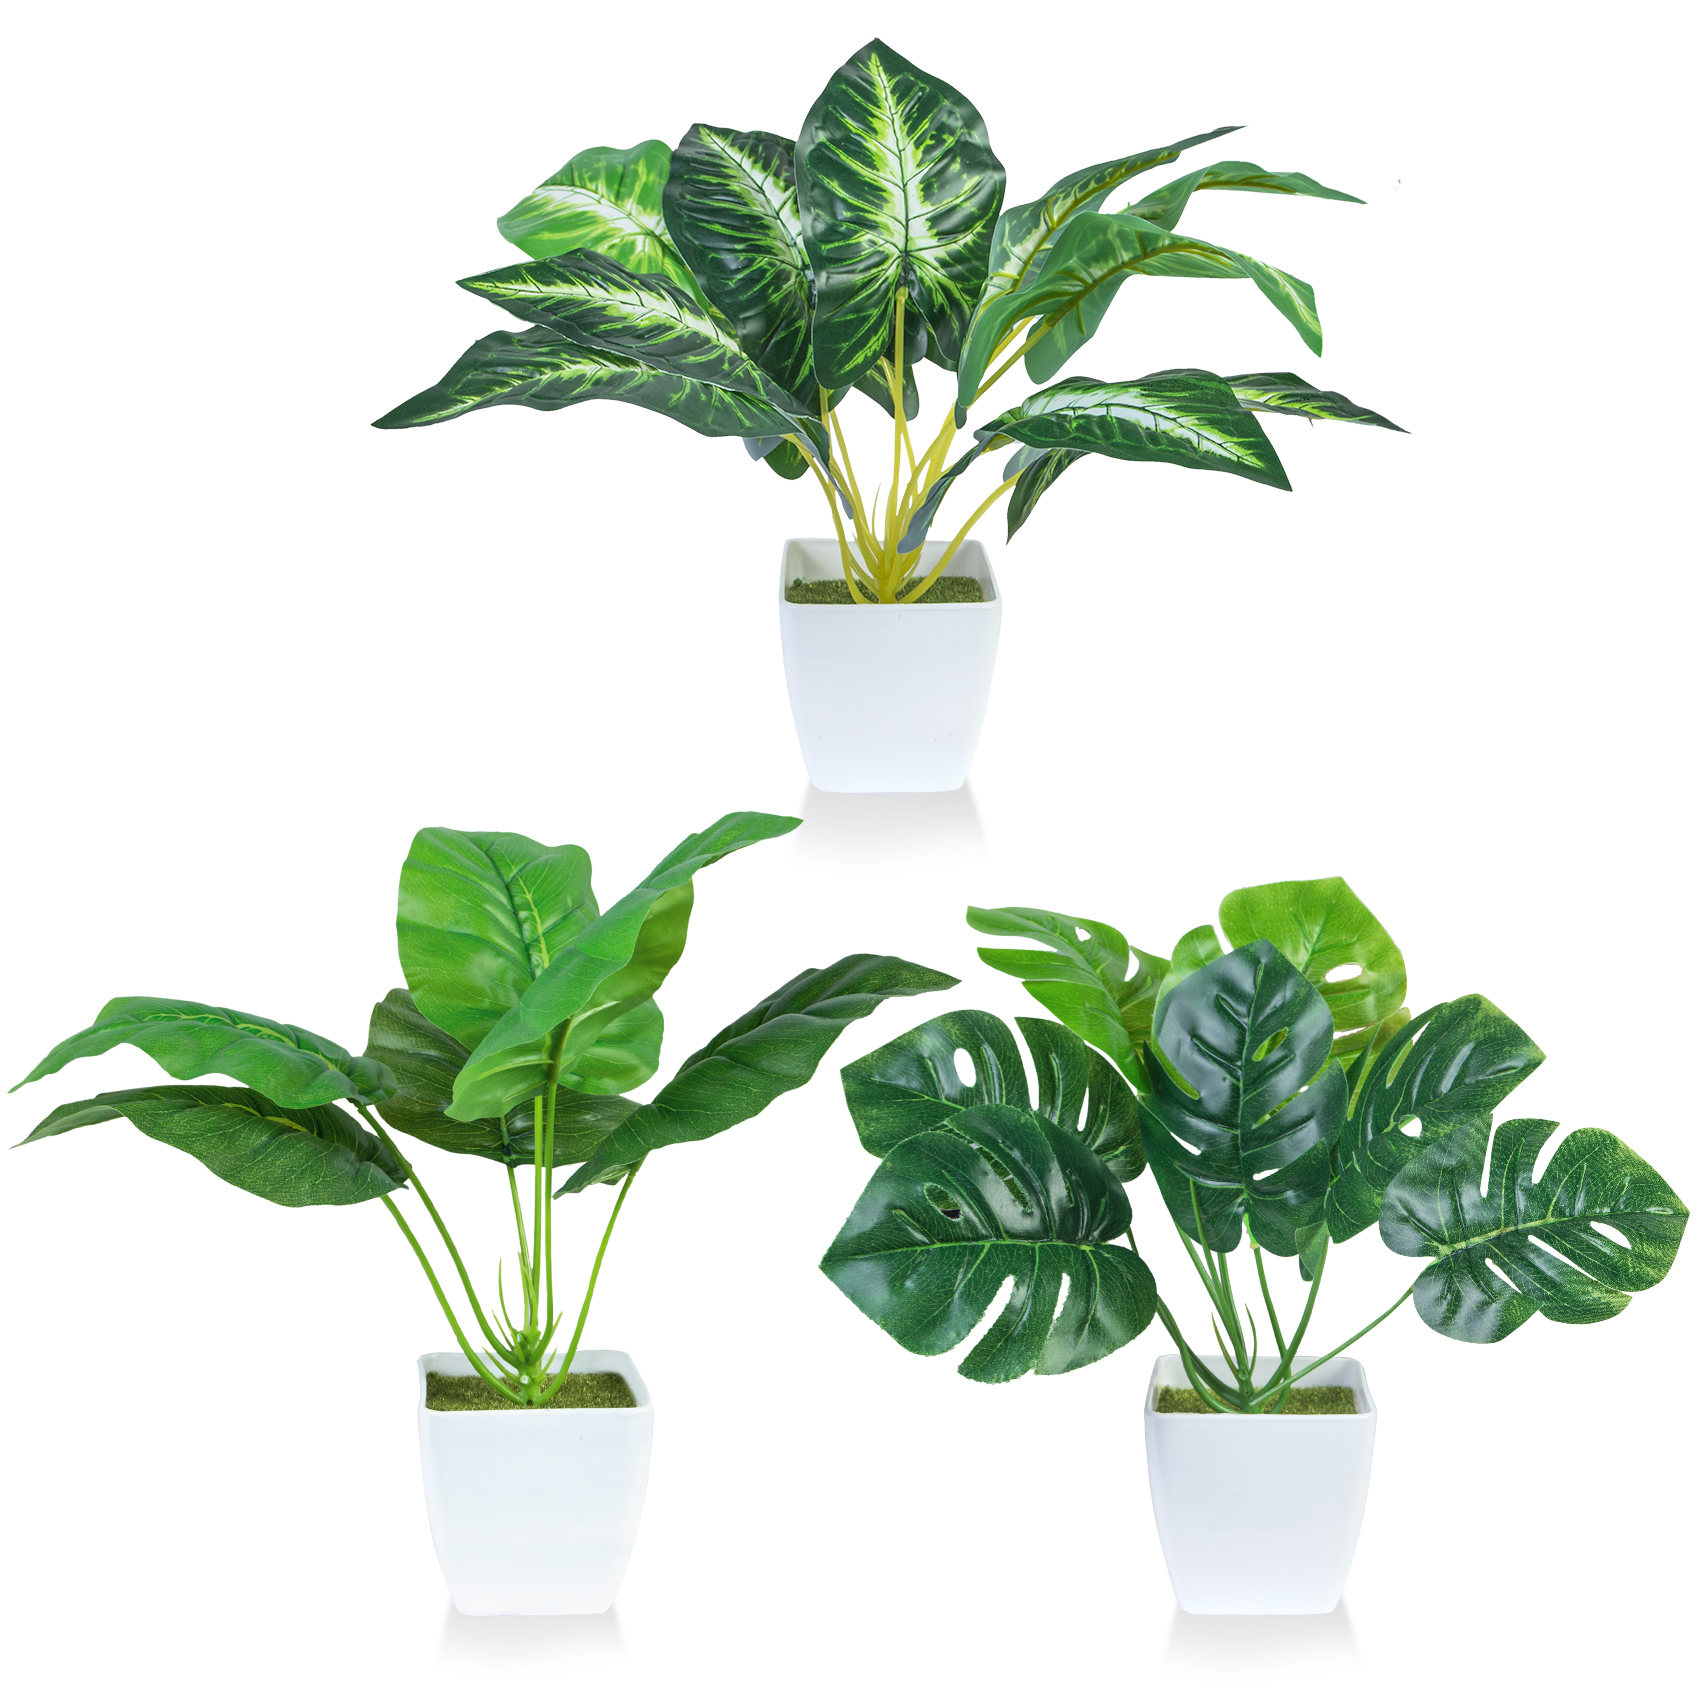 Decorating with Today's Amazing Faux Greenery & Artificial Plants